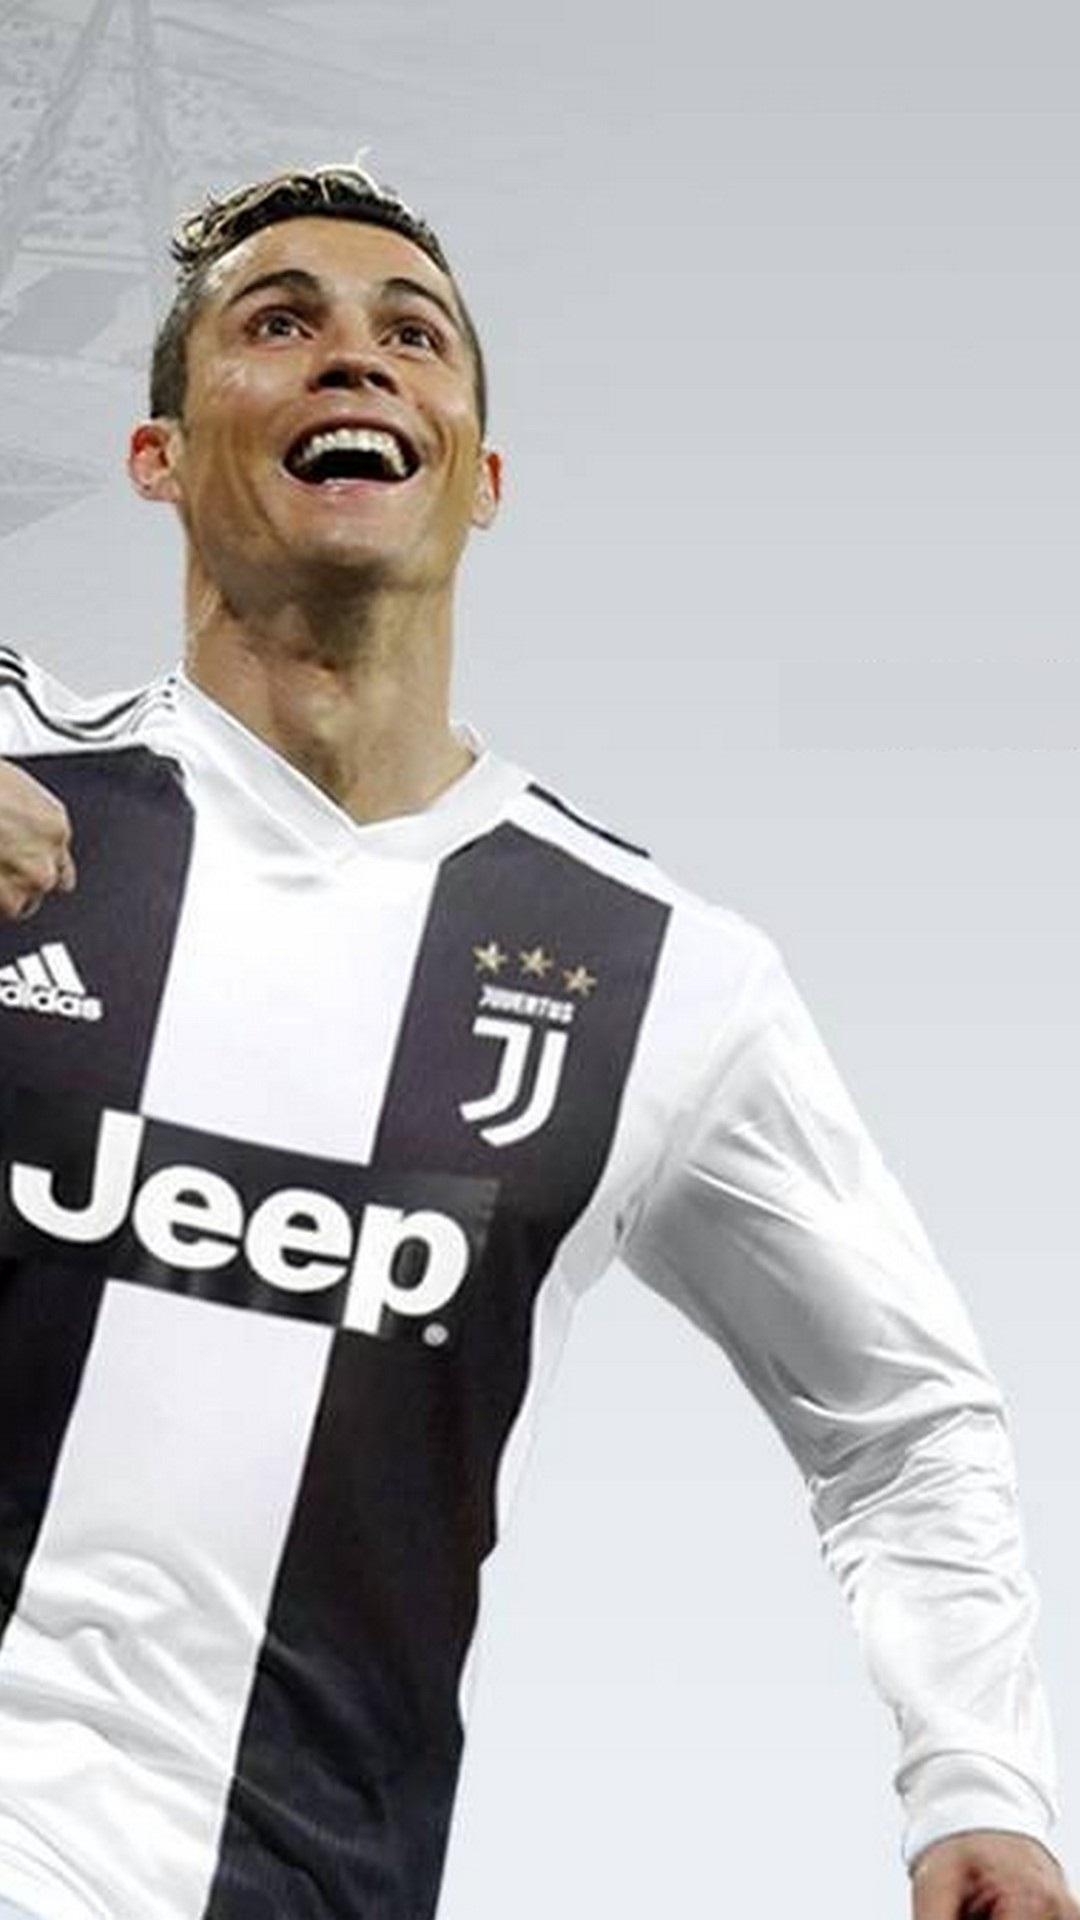 CR7 Juventus Wallpaper For iPhone with image resolution 1080x1920 pixel. You can make this wallpaper for your iPhone 5, 6, 7, 8, X backgrounds, Mobile Screensaver, or iPad Lock Screen